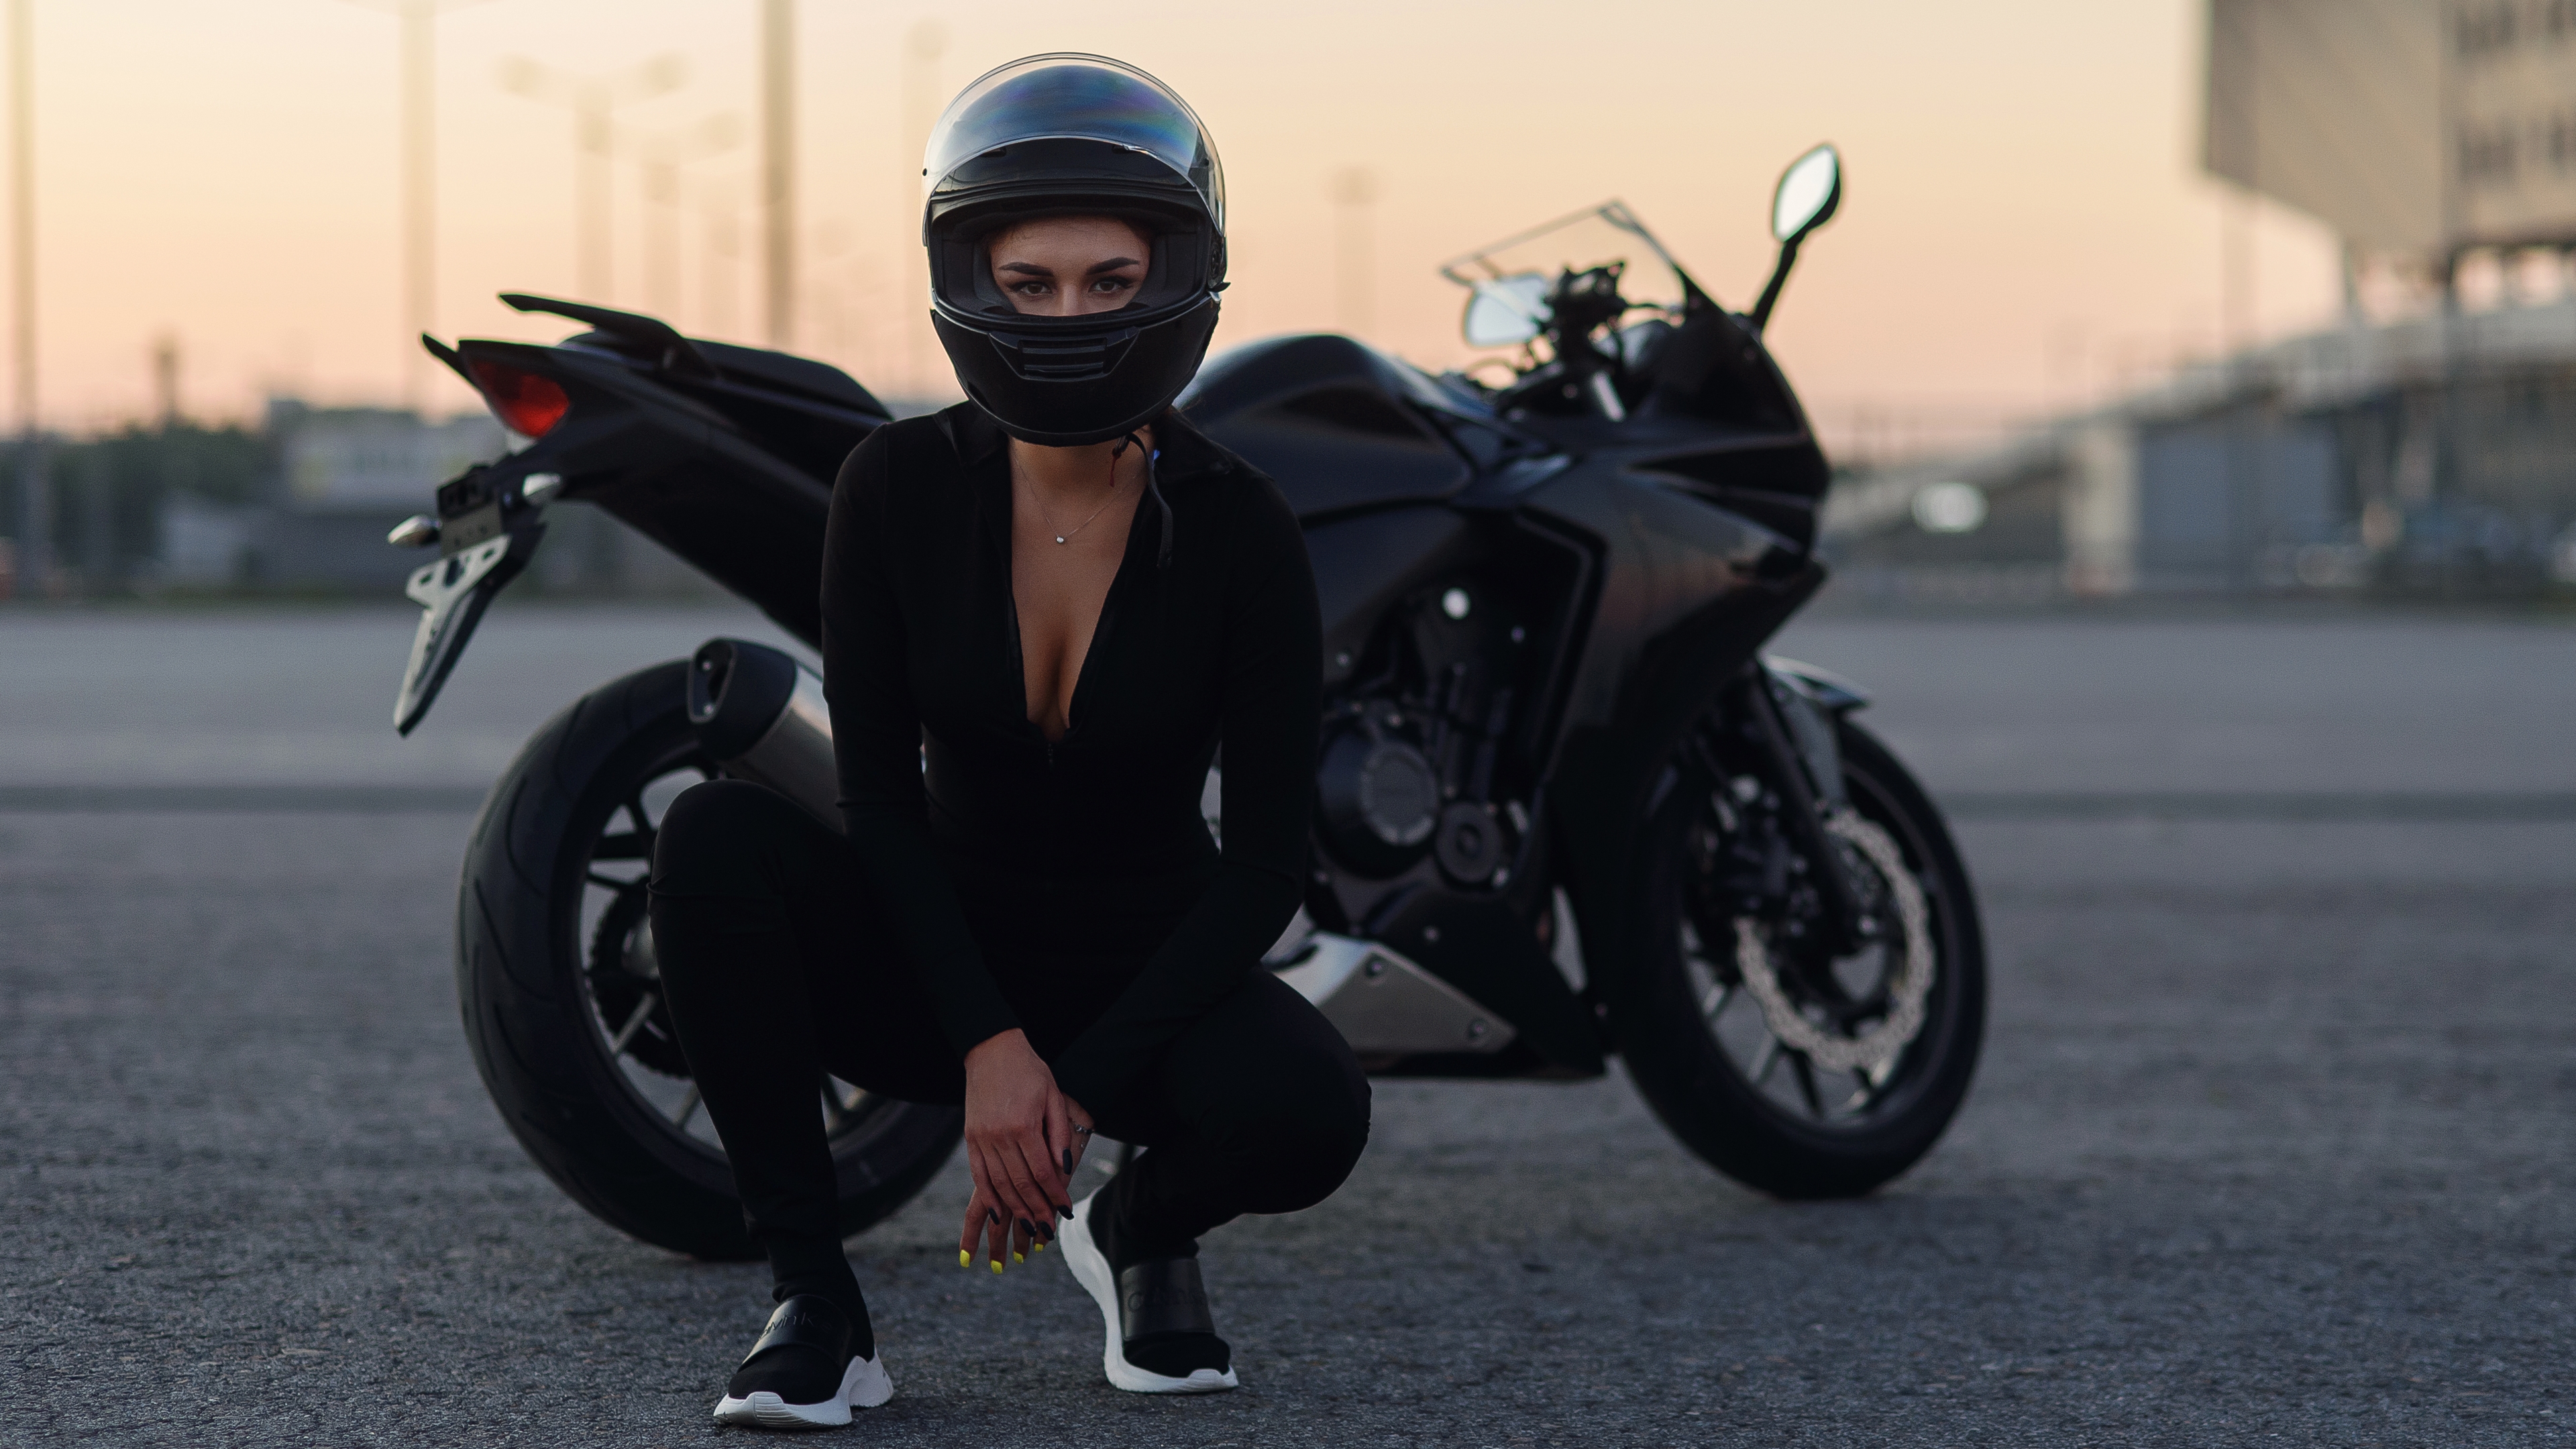 Women Motorcycle Motorcyclist Helmet Black Clothes Black Clothing 4K Frontal View 3840x2160